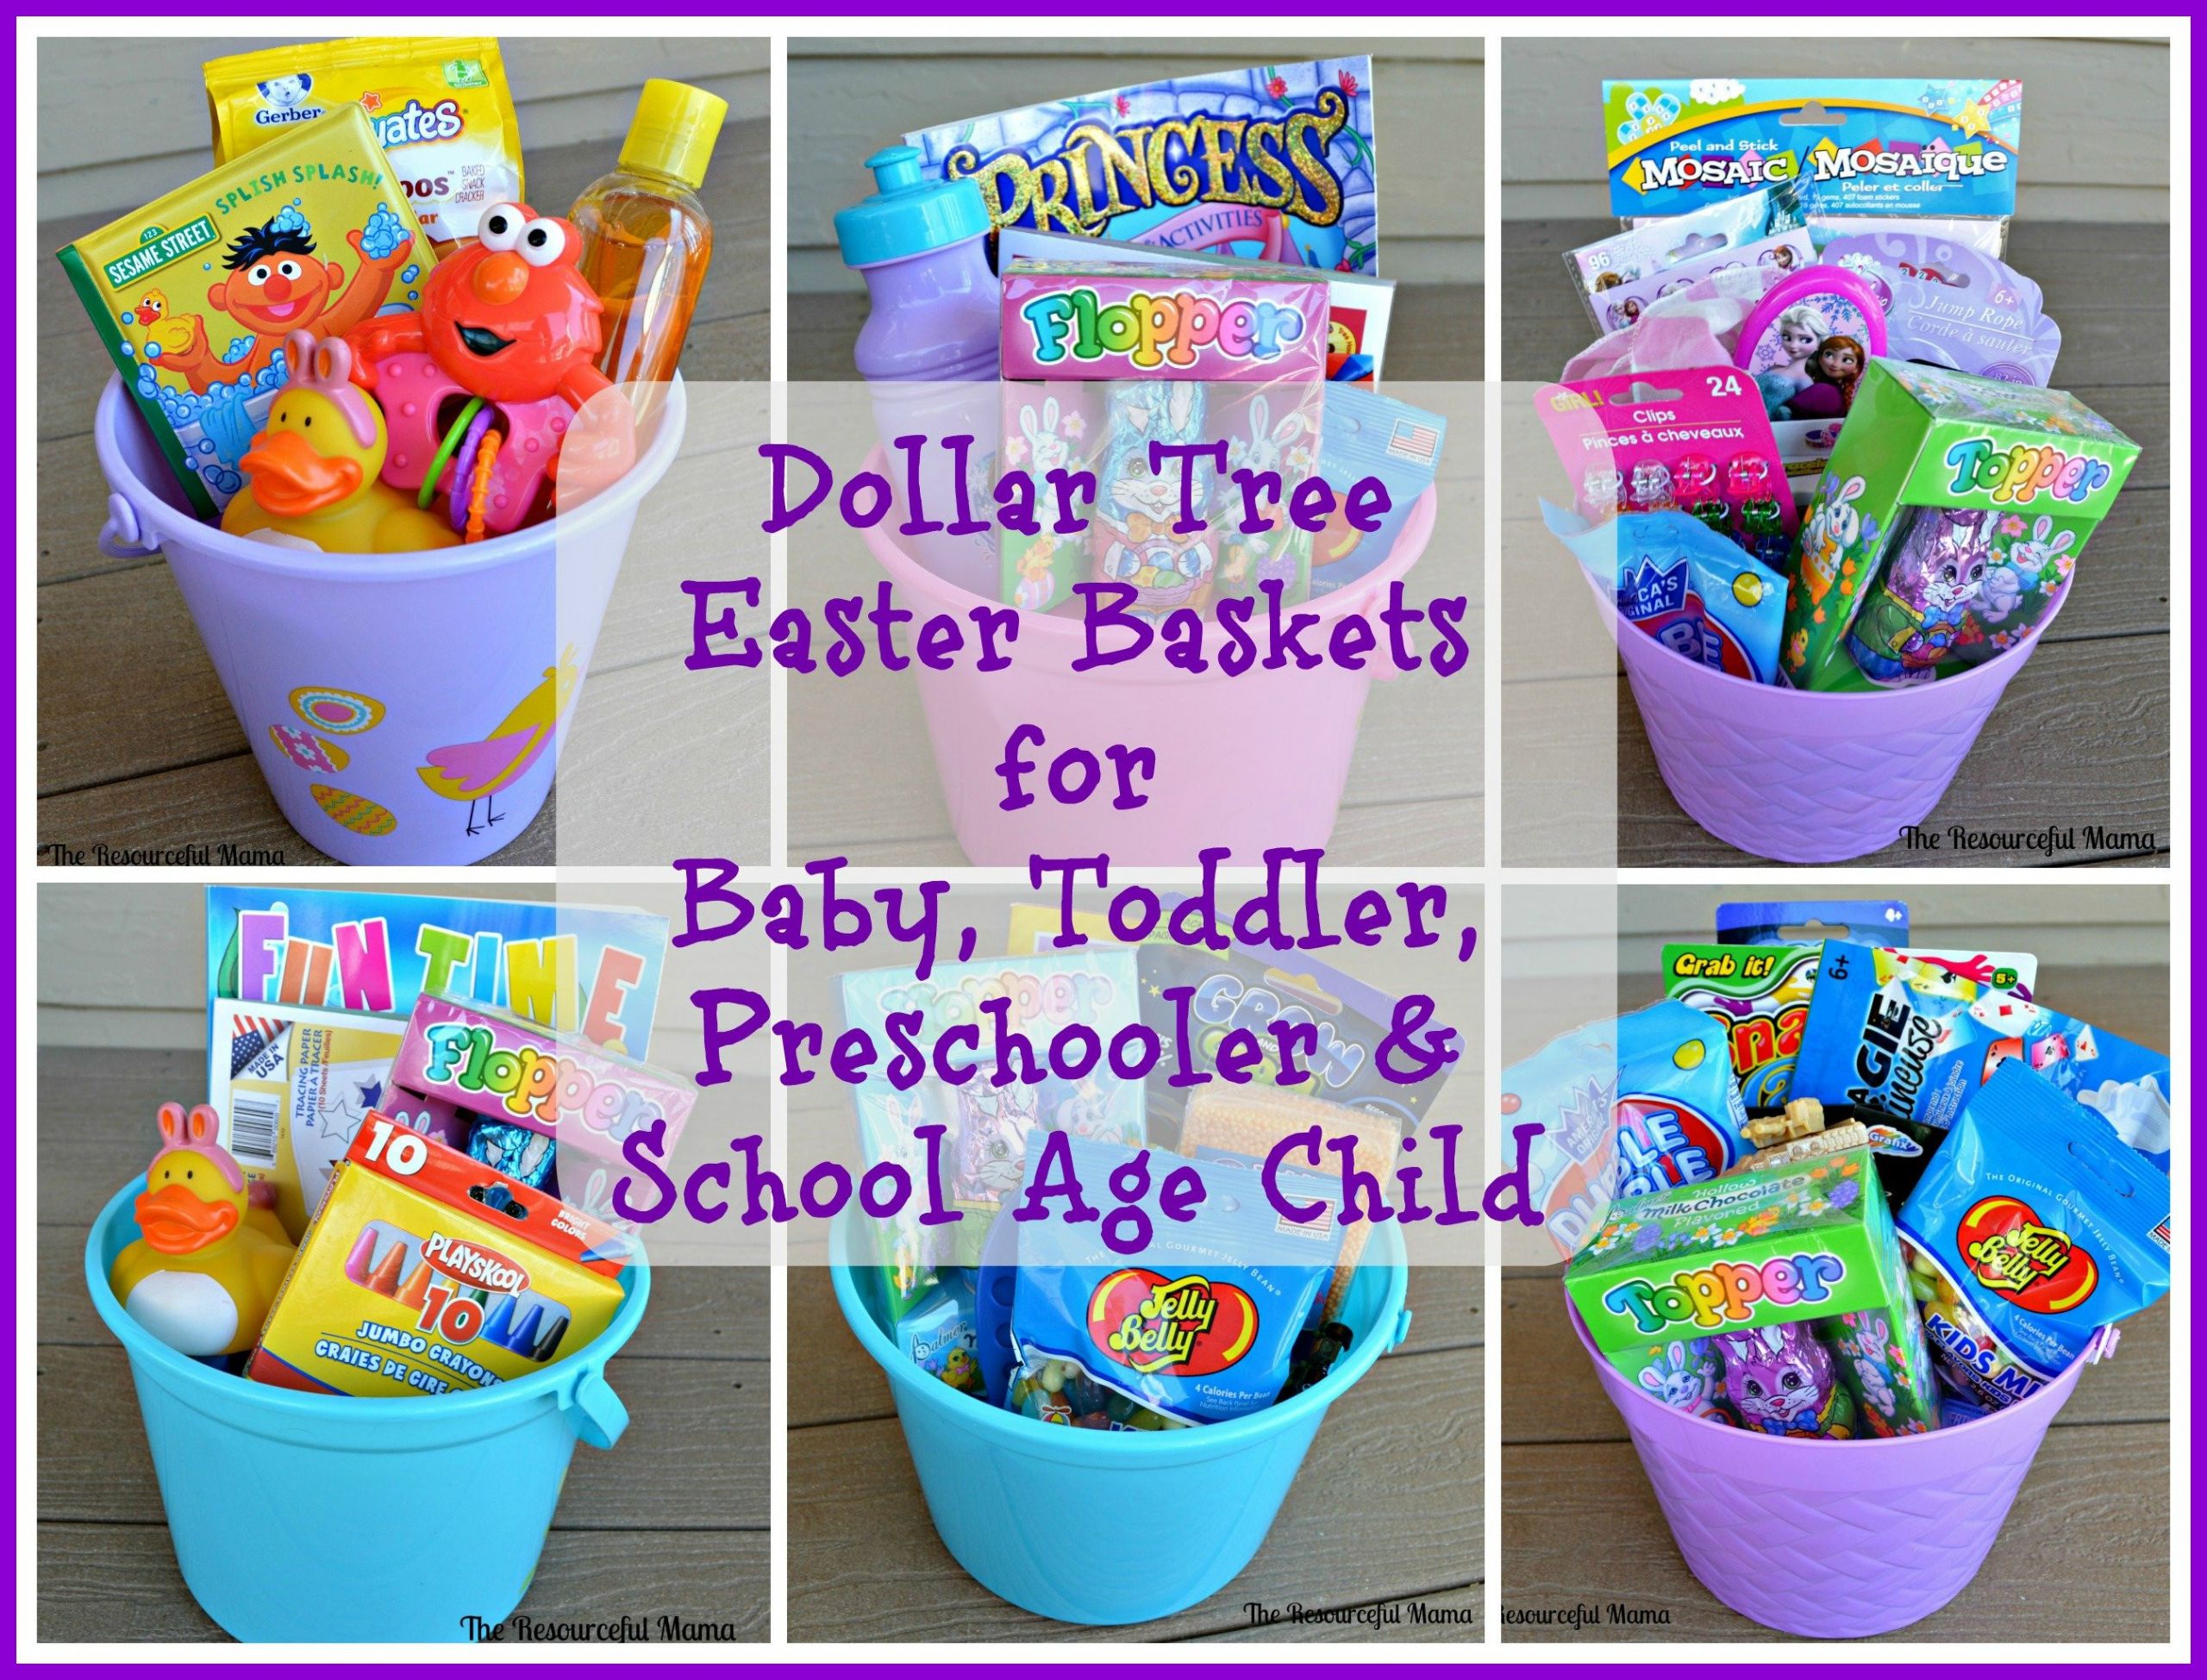 Toddler Easter Baskets Ideas
 Dollar Tree Easter Baskets The Resourceful Mama